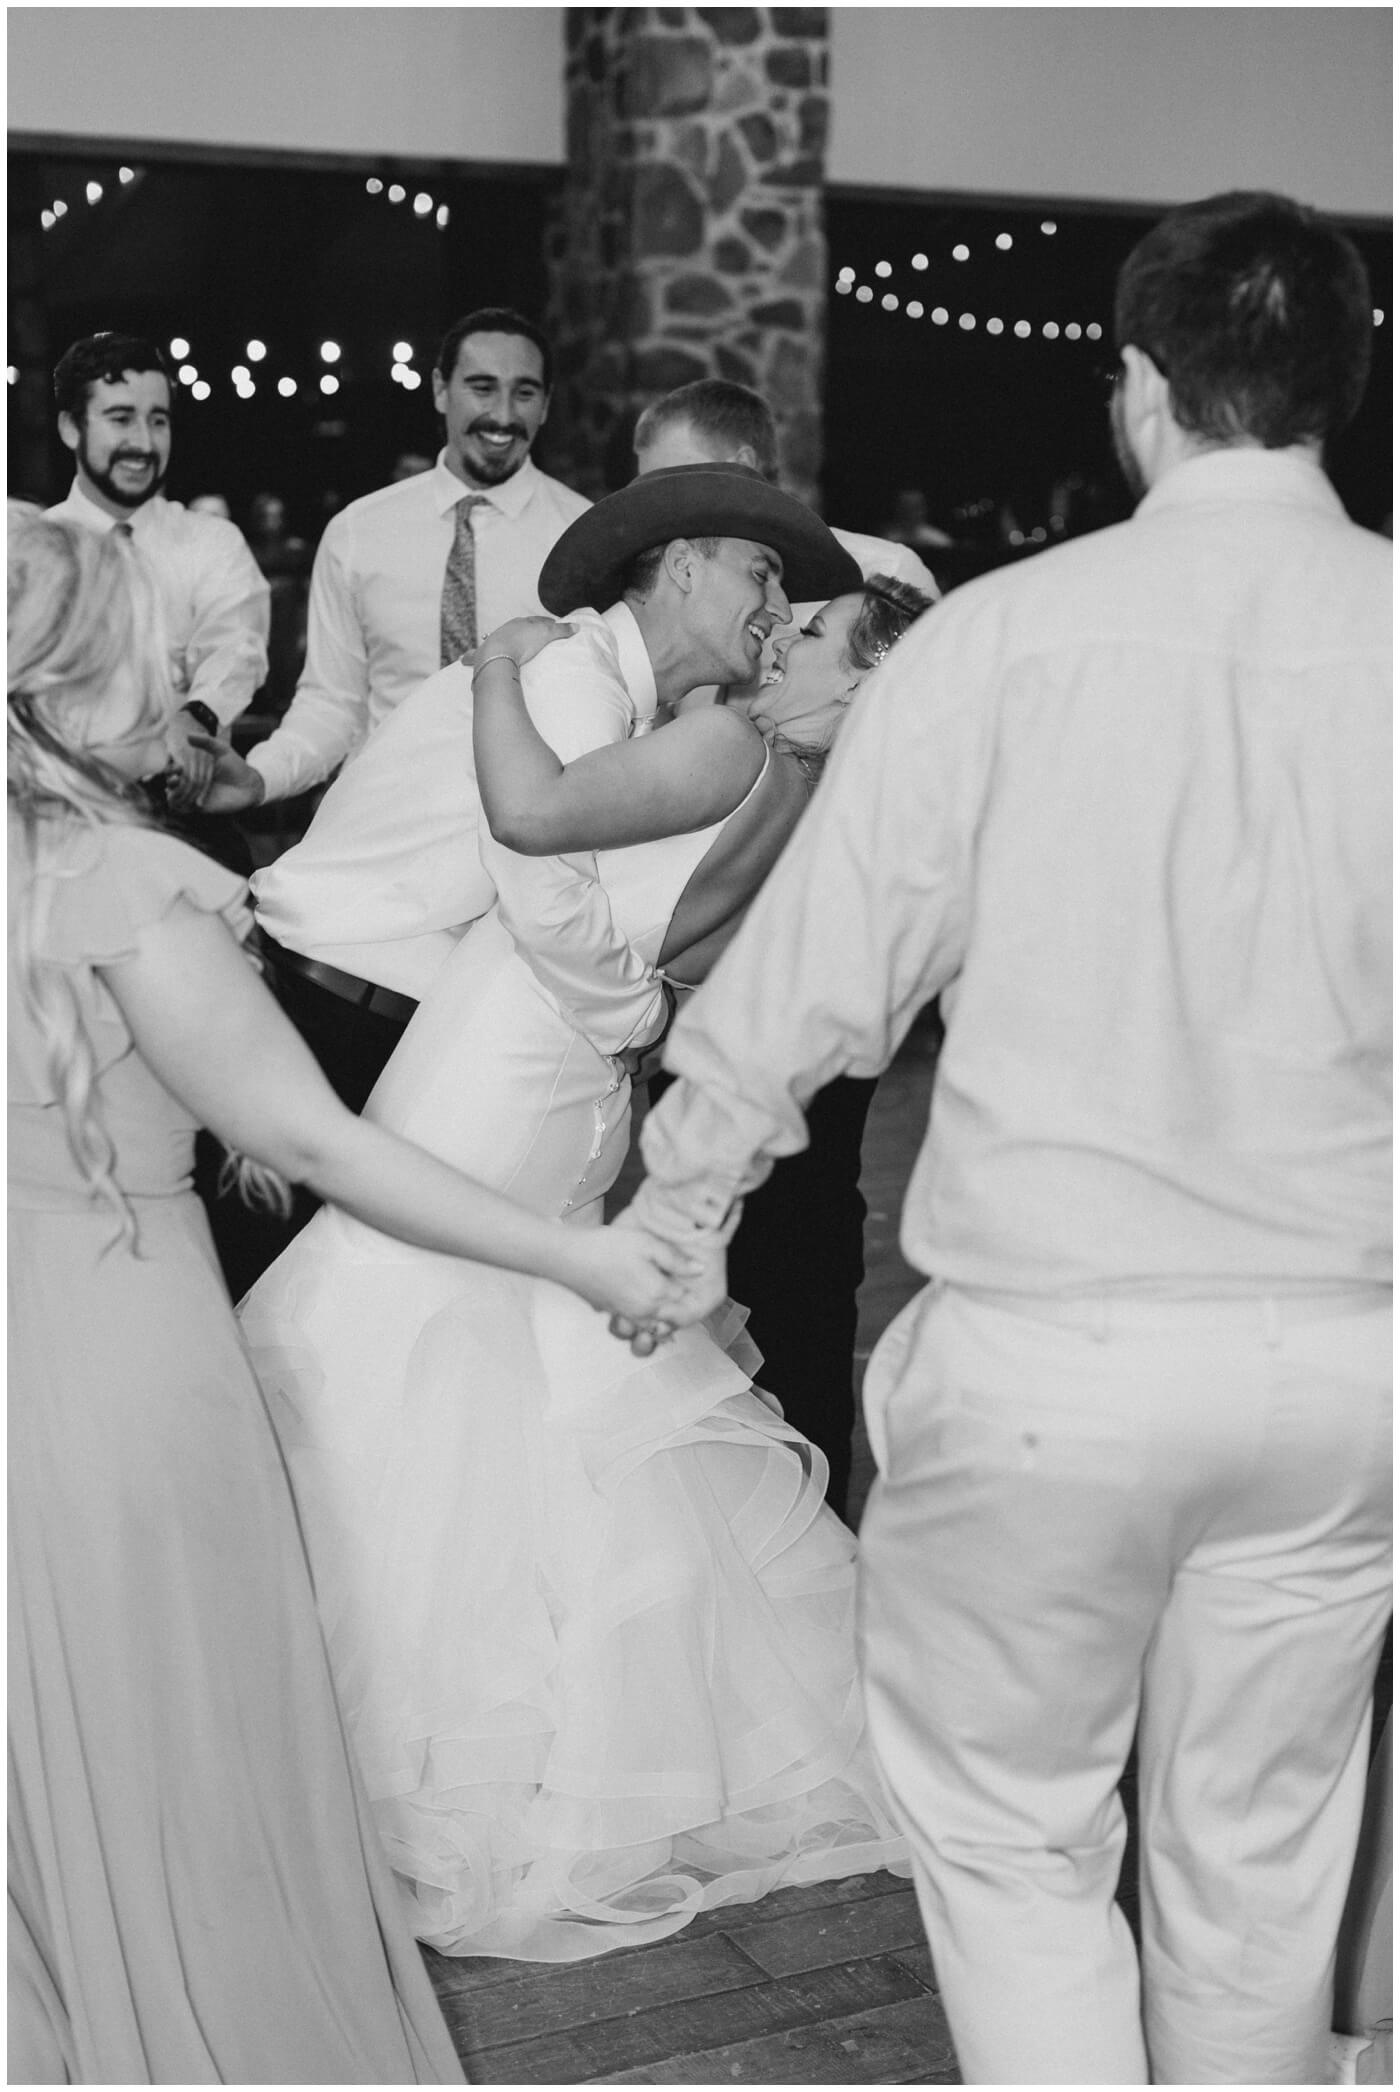 Houston Wedding at The Vine | the bride and groom laugh together while dancing with their wedding guests